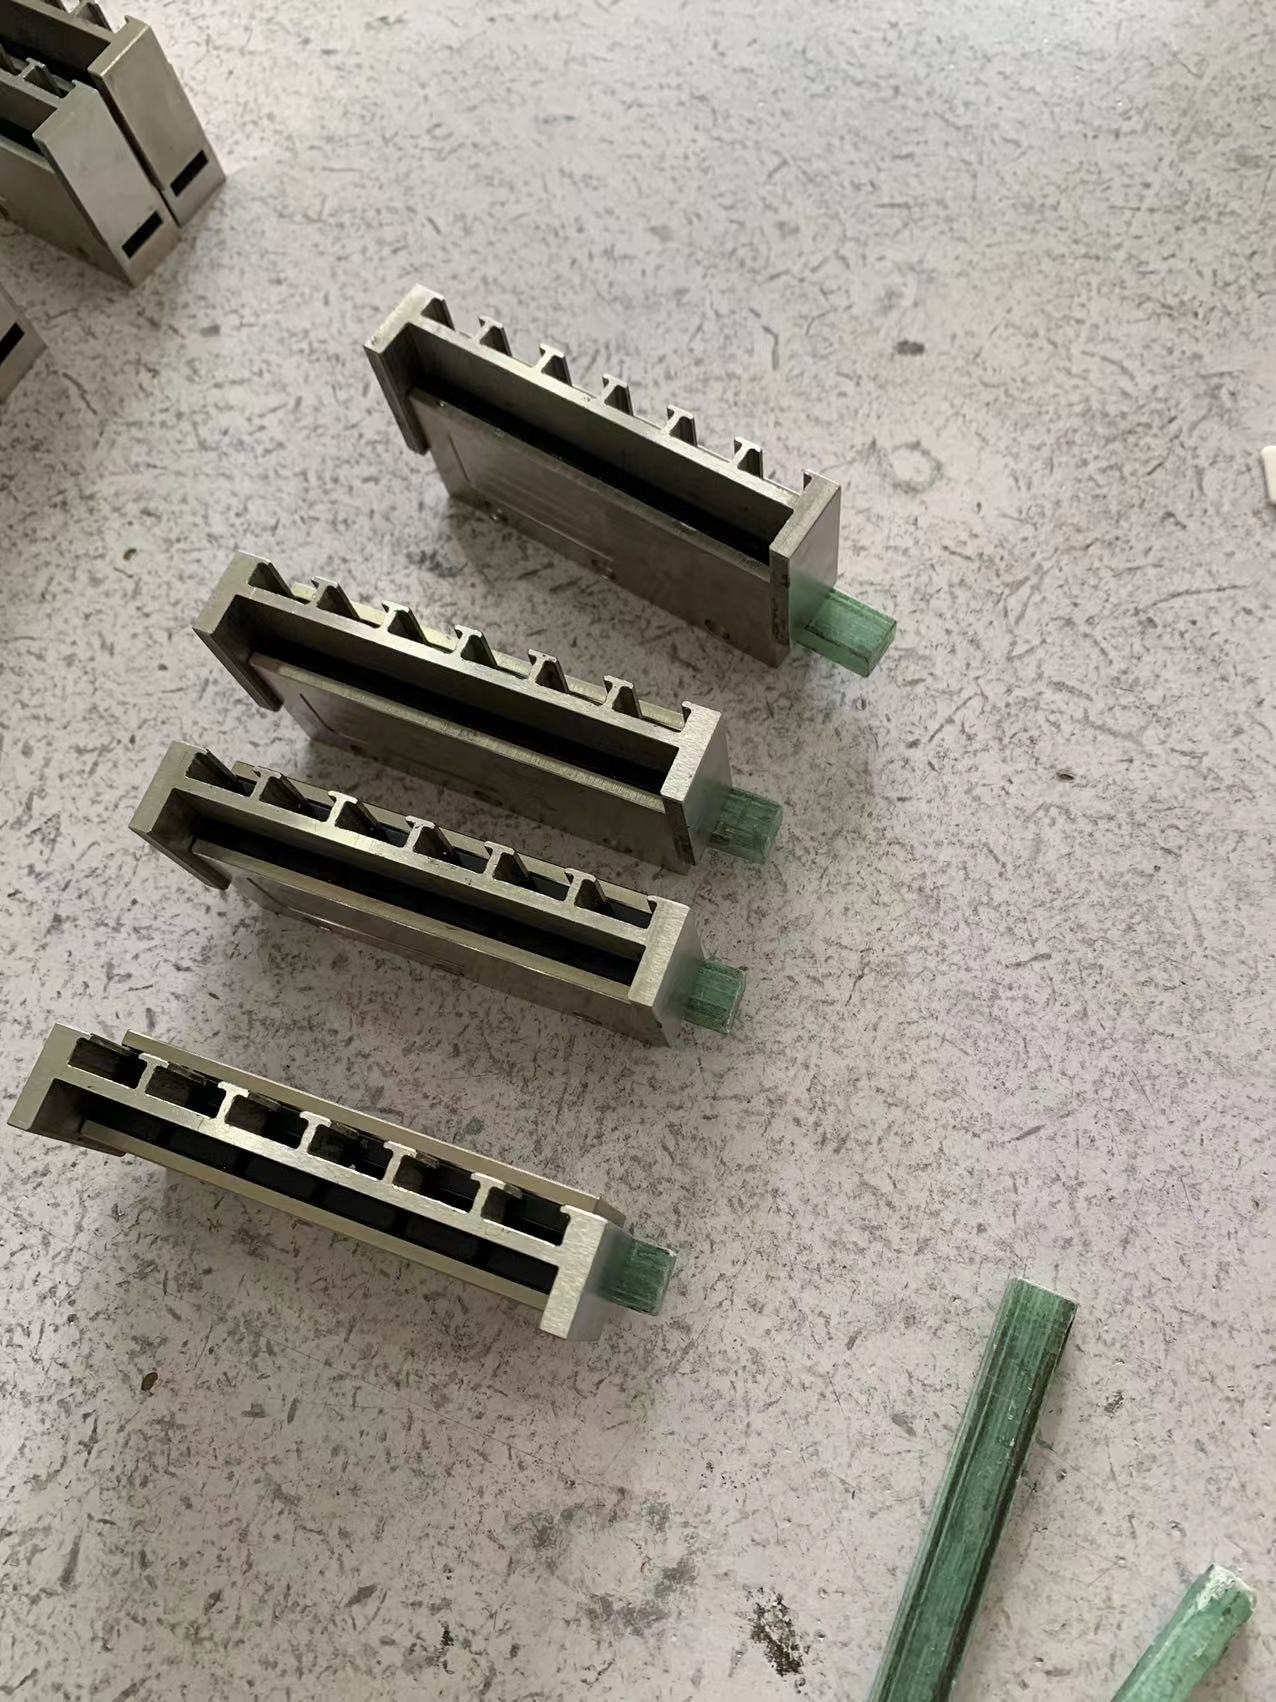 SmCo Linear Motor Magnets